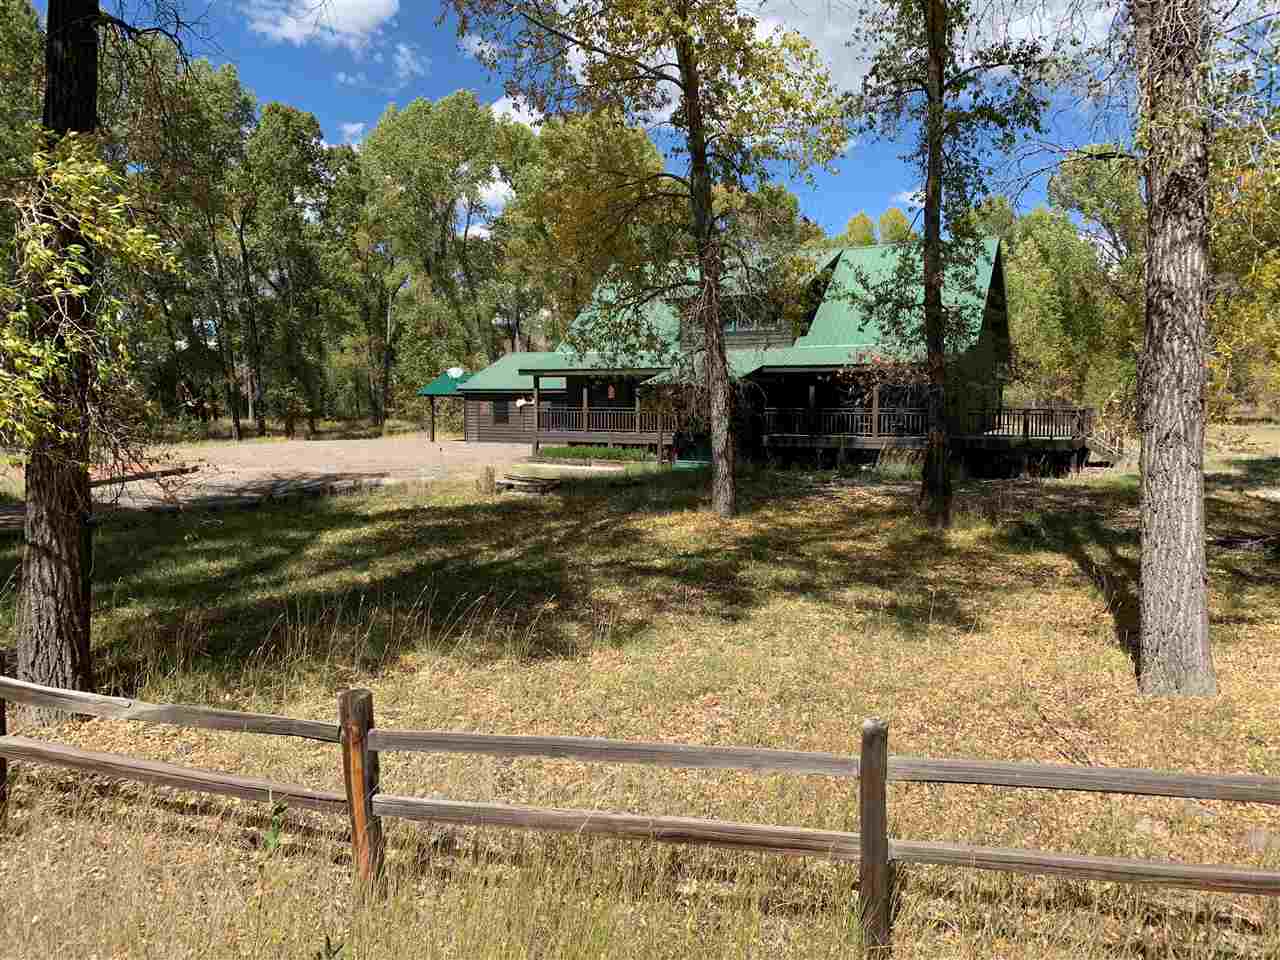 4189 Choke Cherry, Chama, New Mexico 87520, 4 Bedrooms Bedrooms, ,2 BathroomsBathrooms,Residential,For Sale,4189 Choke Cherry,202100870